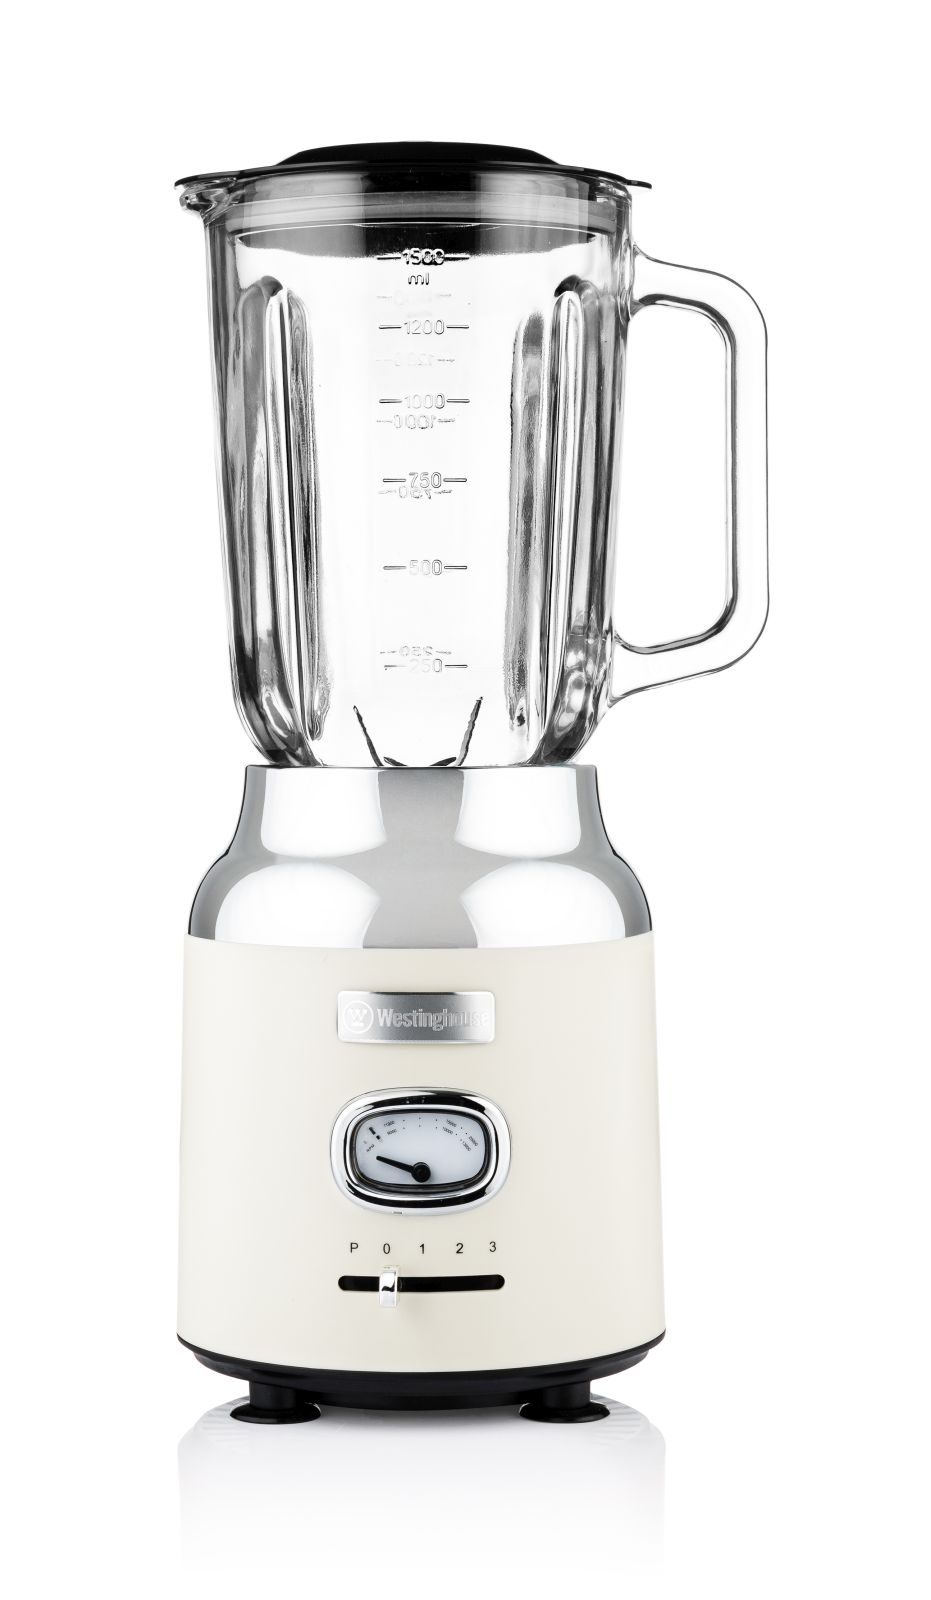 General Electric Select Edition 500 W Silver Blender